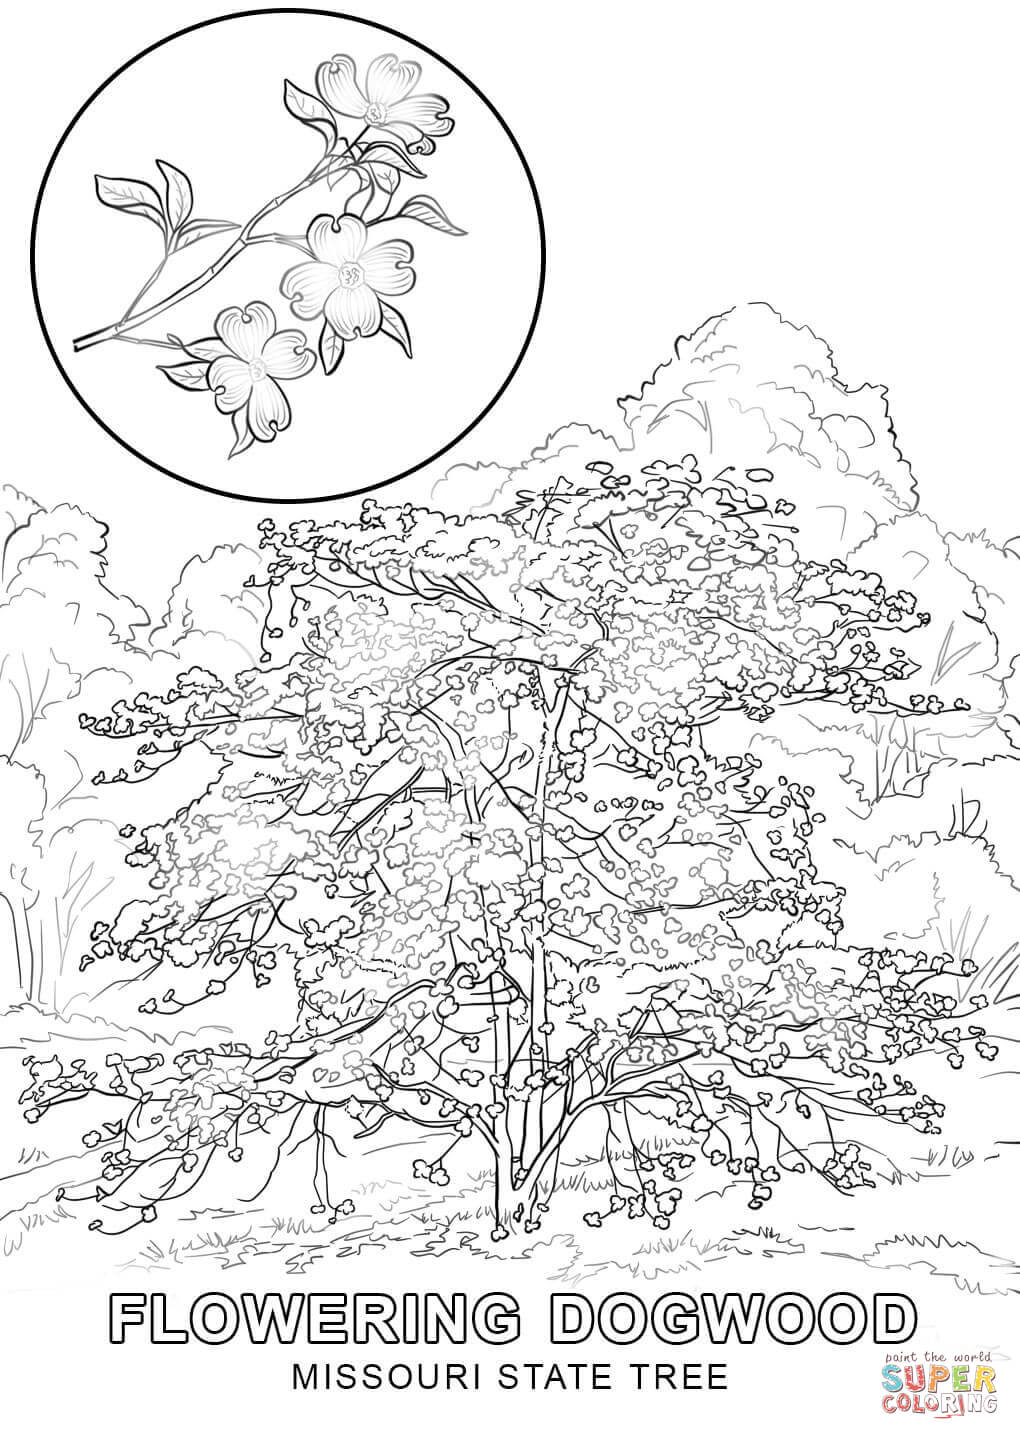 Missouri State Tree Coloring Page | Free Printable Coloring Pages ...